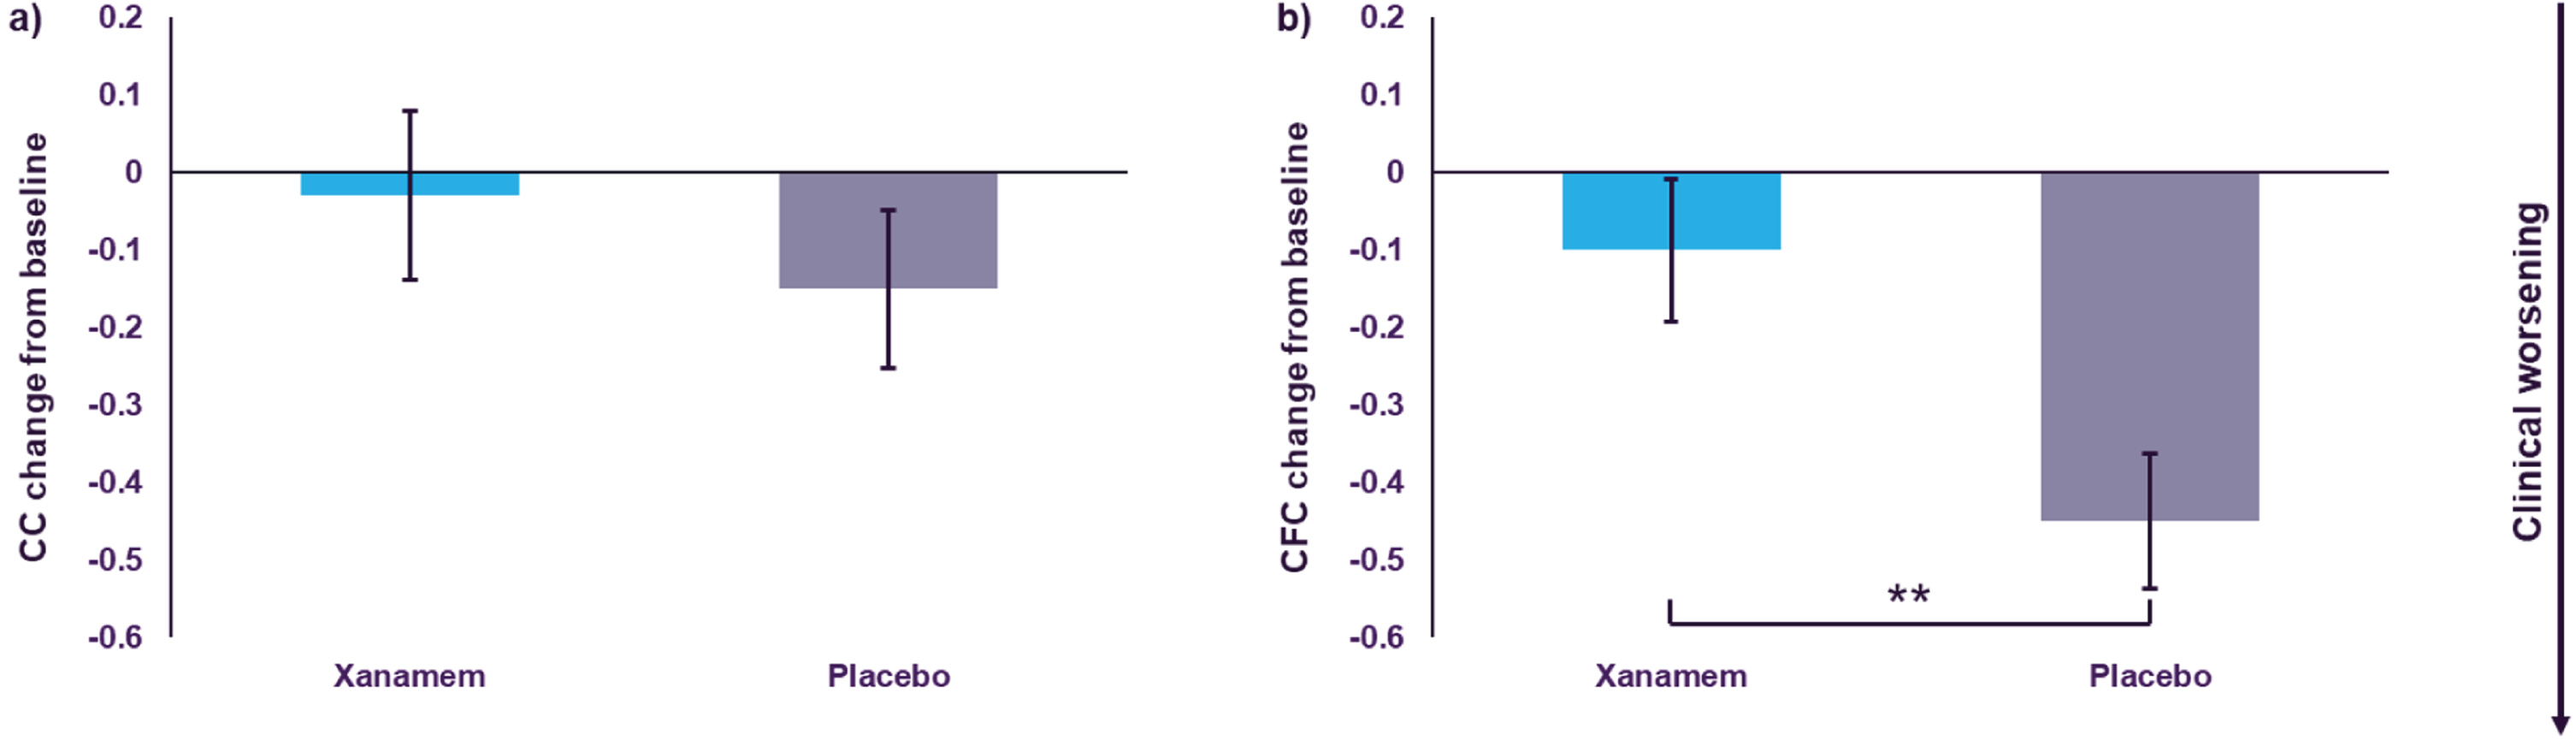 Xanamem versus placebo Z-score change from baseline score in the pTau181 >  median (“H”) subgroup for exploratory Cognitive and Cognitive-Functional composites. a) Z-score change from baseline scores (Least Squares [LS] mean+/– Standard Error [SE]) on a Cognitive Composite (CC) comprising selected tests from the AD Assessment Scales – Cognitive subscale ([ADAS-Cog] Word Recall, Word Recognition, and Orientation), the Category Fluency Test (CFT), and the Controlled Oral Word Association Test (COWAT; Cohen’s d [d] = 0.2). b) Z-score change from baseline scores (LS mean+/-SE) on the integrated Cognitive-Functional Composite (CFC) comprising the z-score Clinical Dementia Rating Scale – Sum of Boxes (CDR-SB) combined with the CC with equal weighting. (d = 0.38). **p = 0.01.